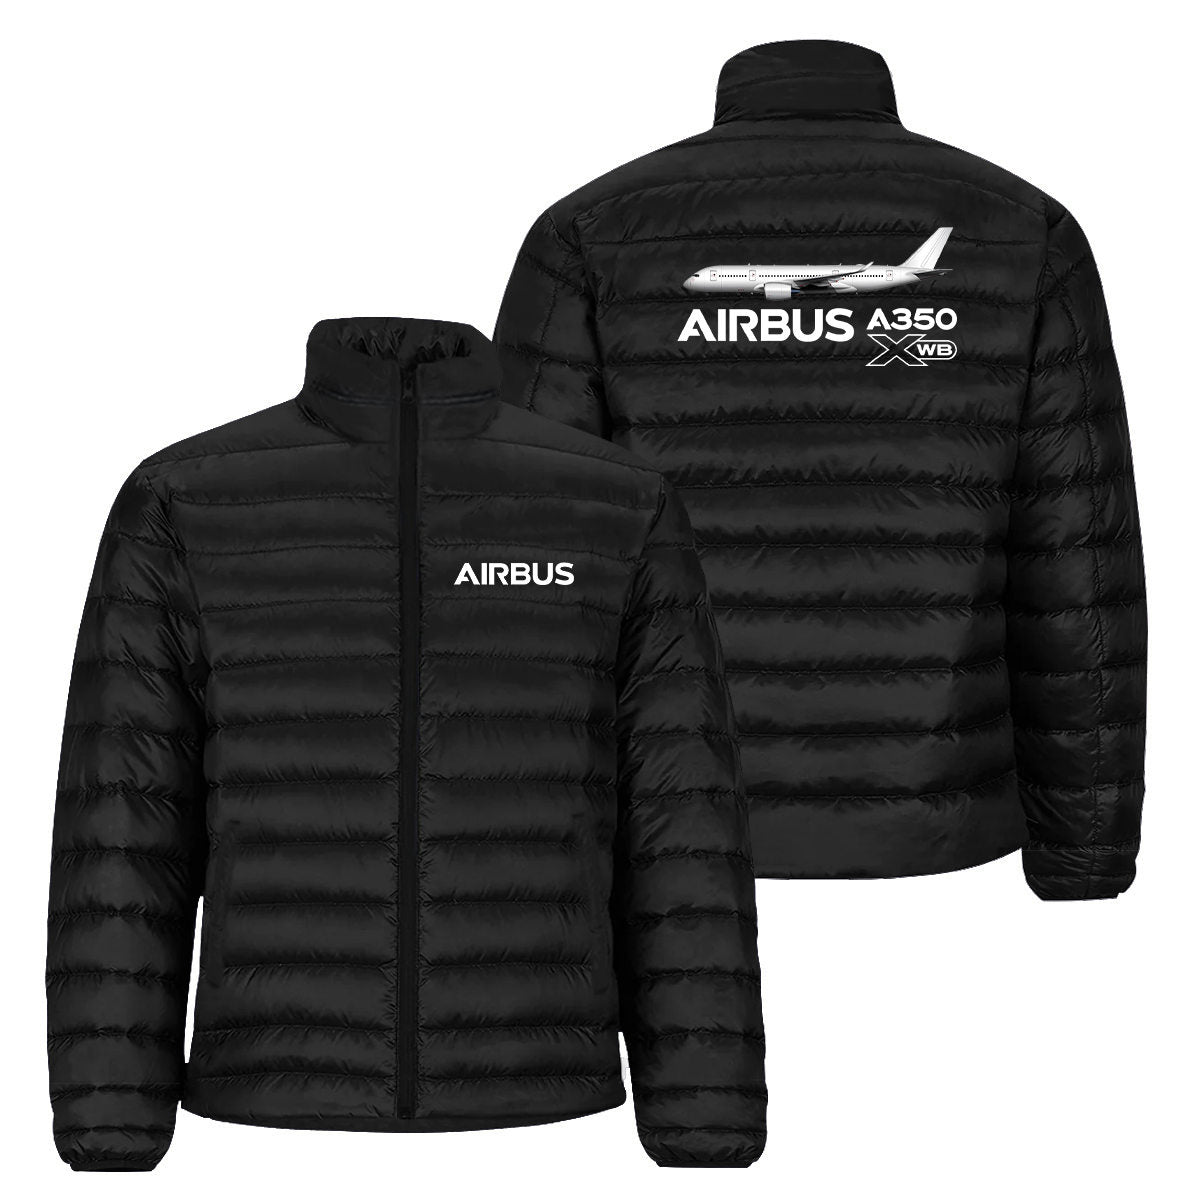 The Airbus A350 WXB Designed Padded Jackets